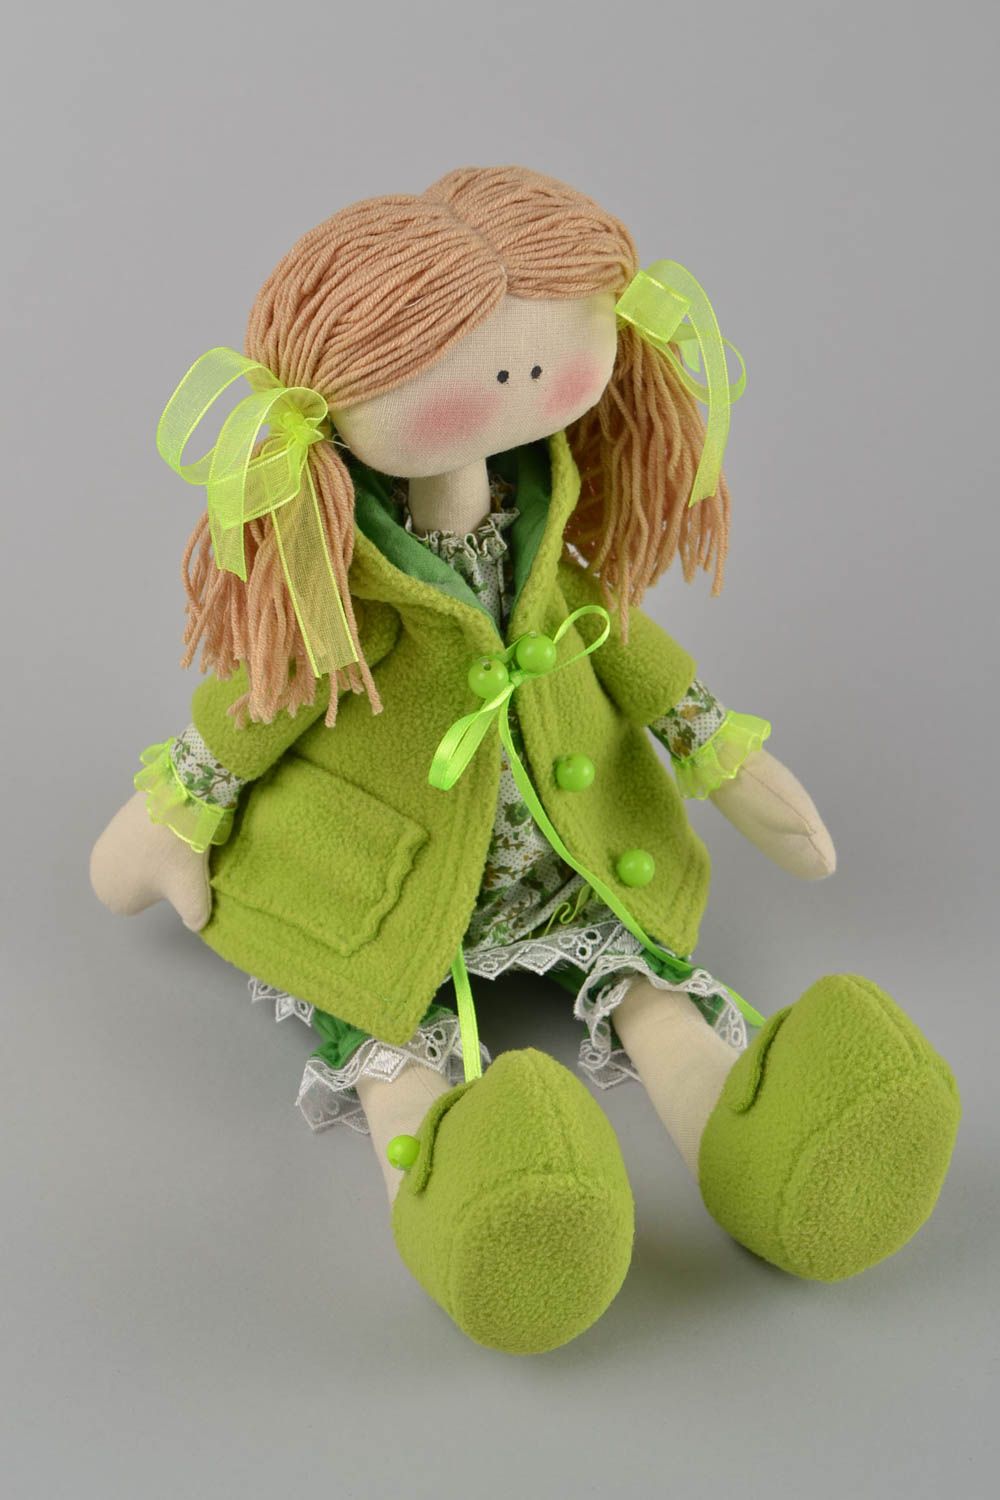 Handmade designer fabric soft doll girl in green clothing with pig tails photo 3